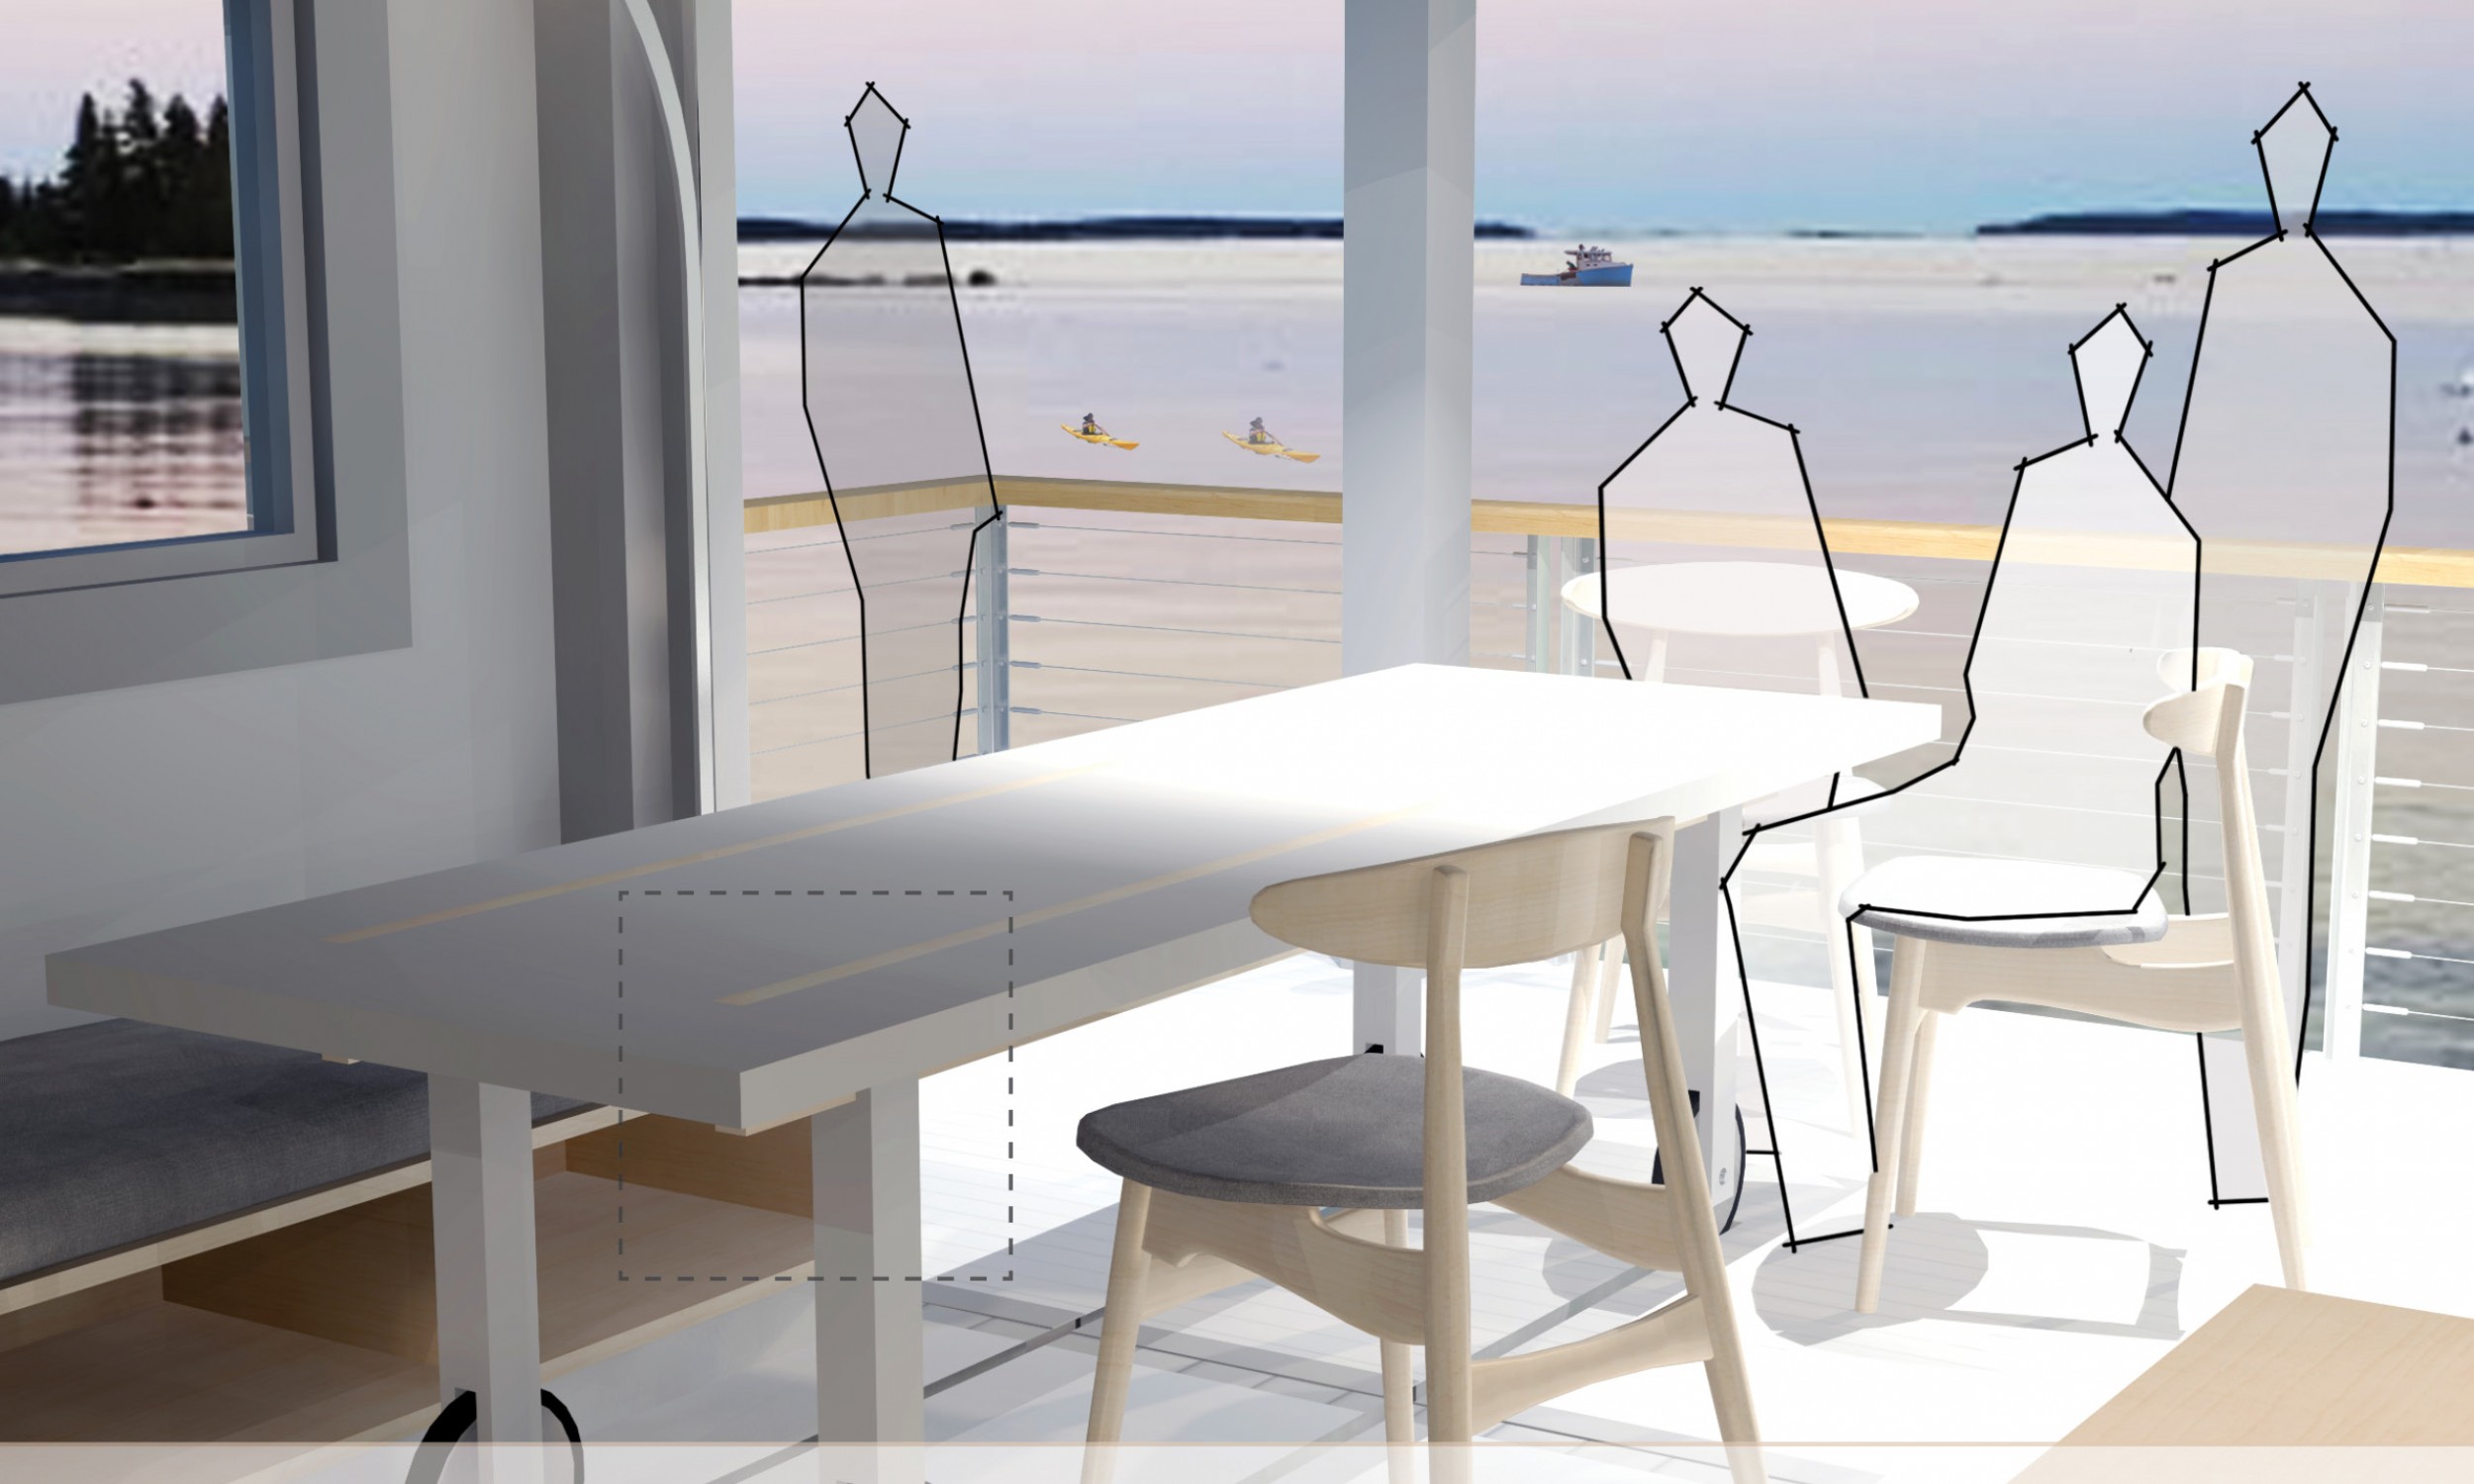 ocean front rendering, Maine architect, cottage interior, sliding dining room table, sliding glass wall